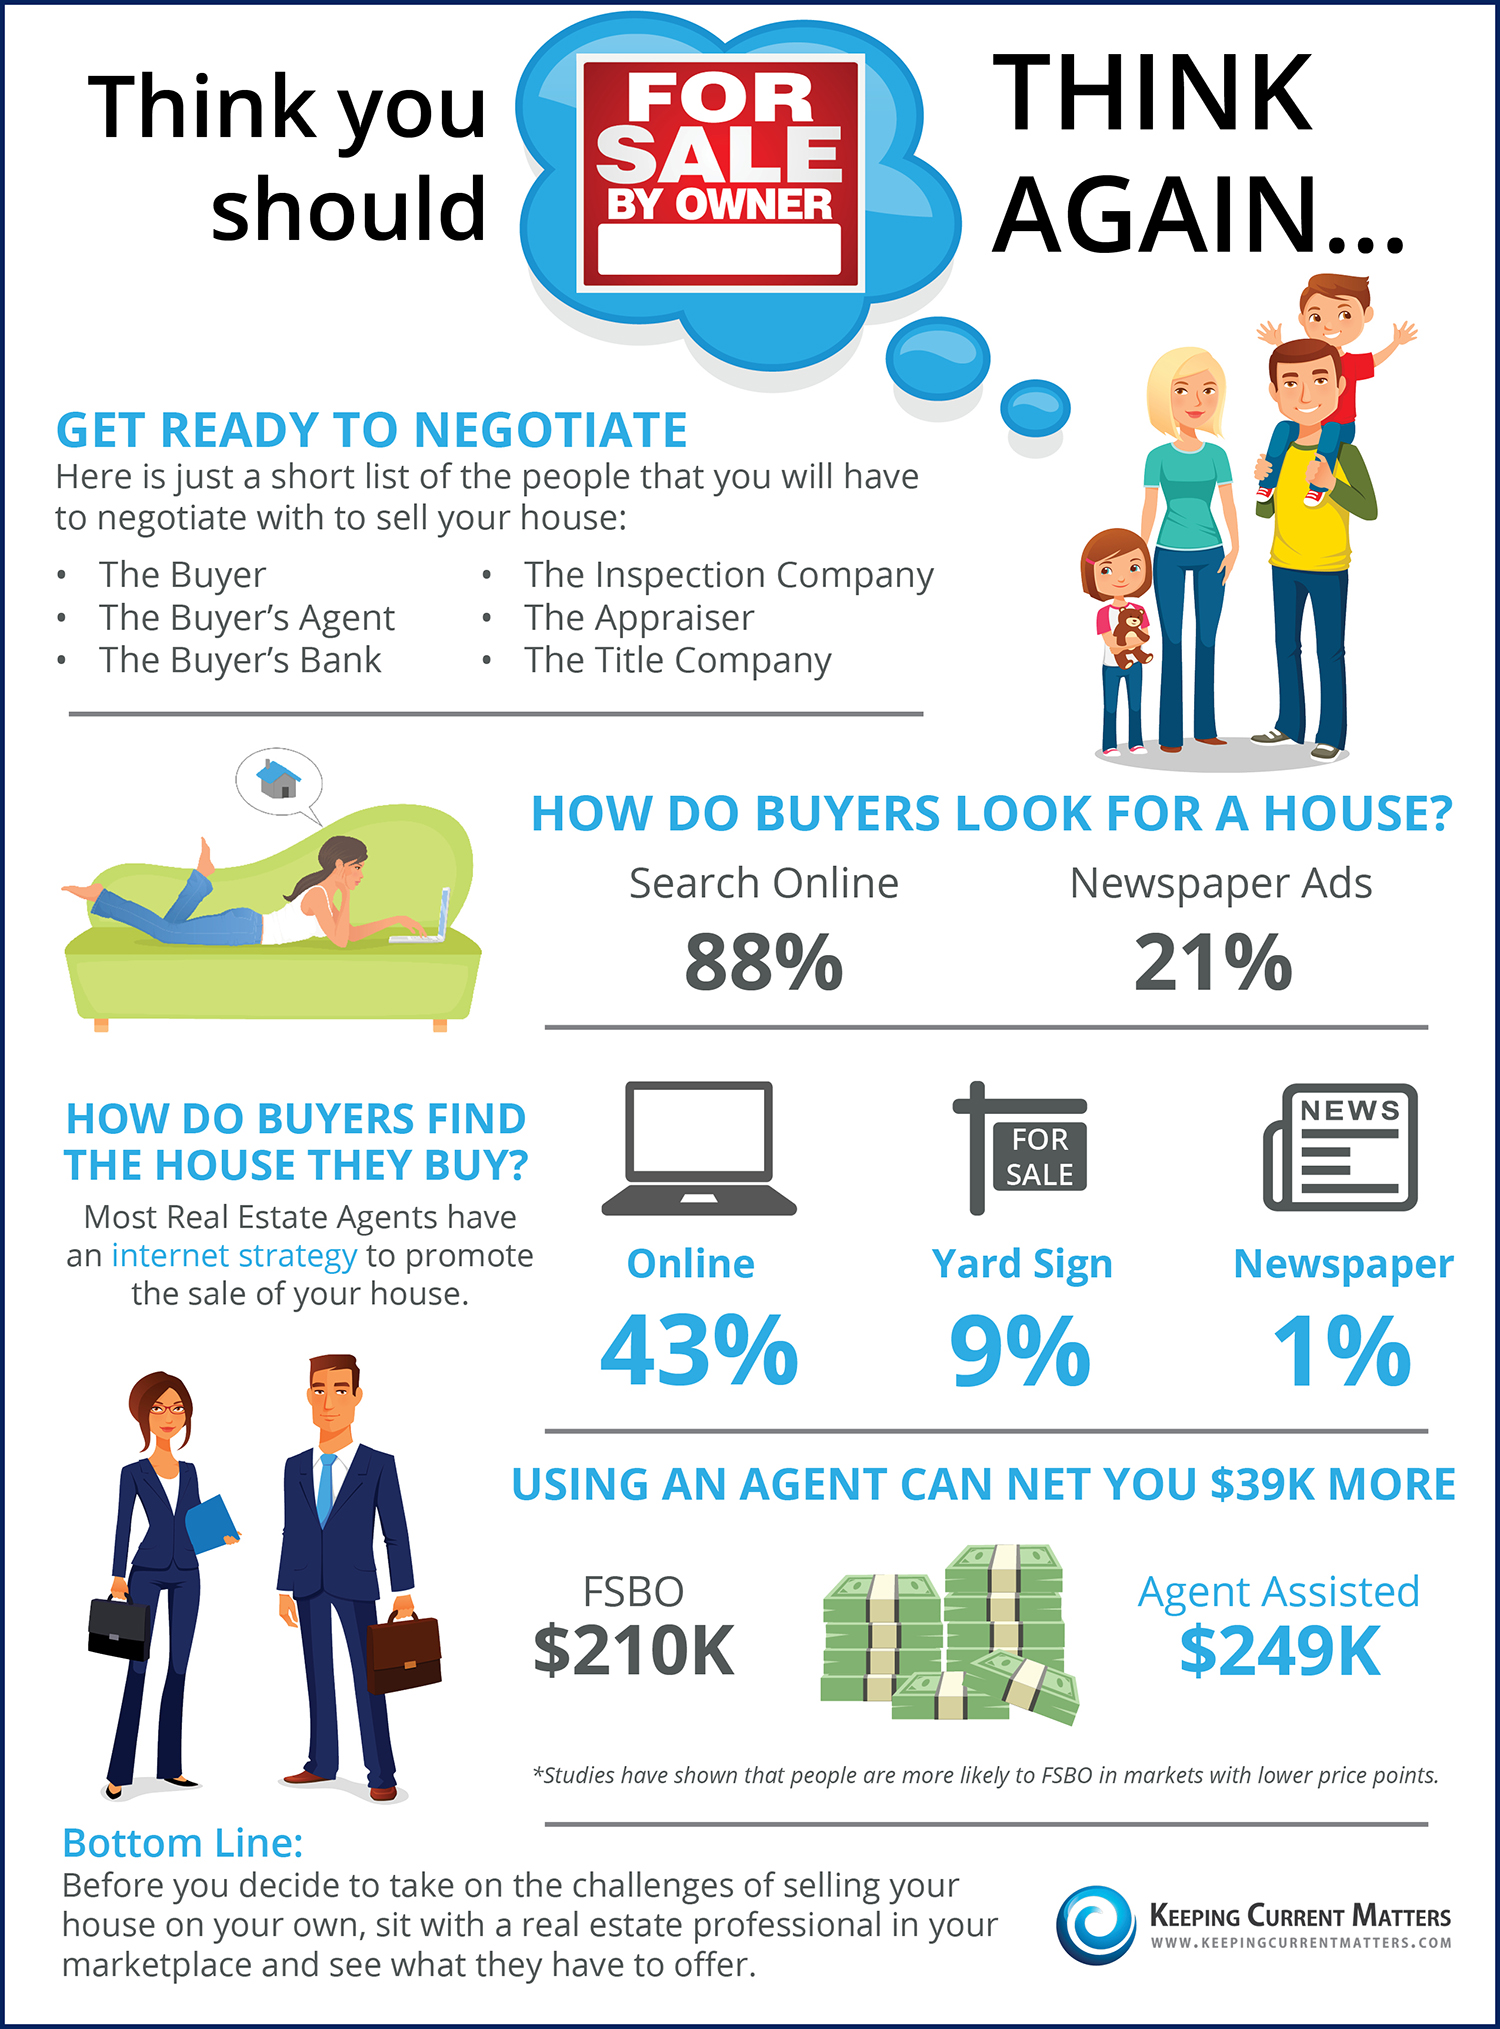 Thinking You Should FSBO? Think Again [INFOGRAPHIC] | Keeping Current Matters